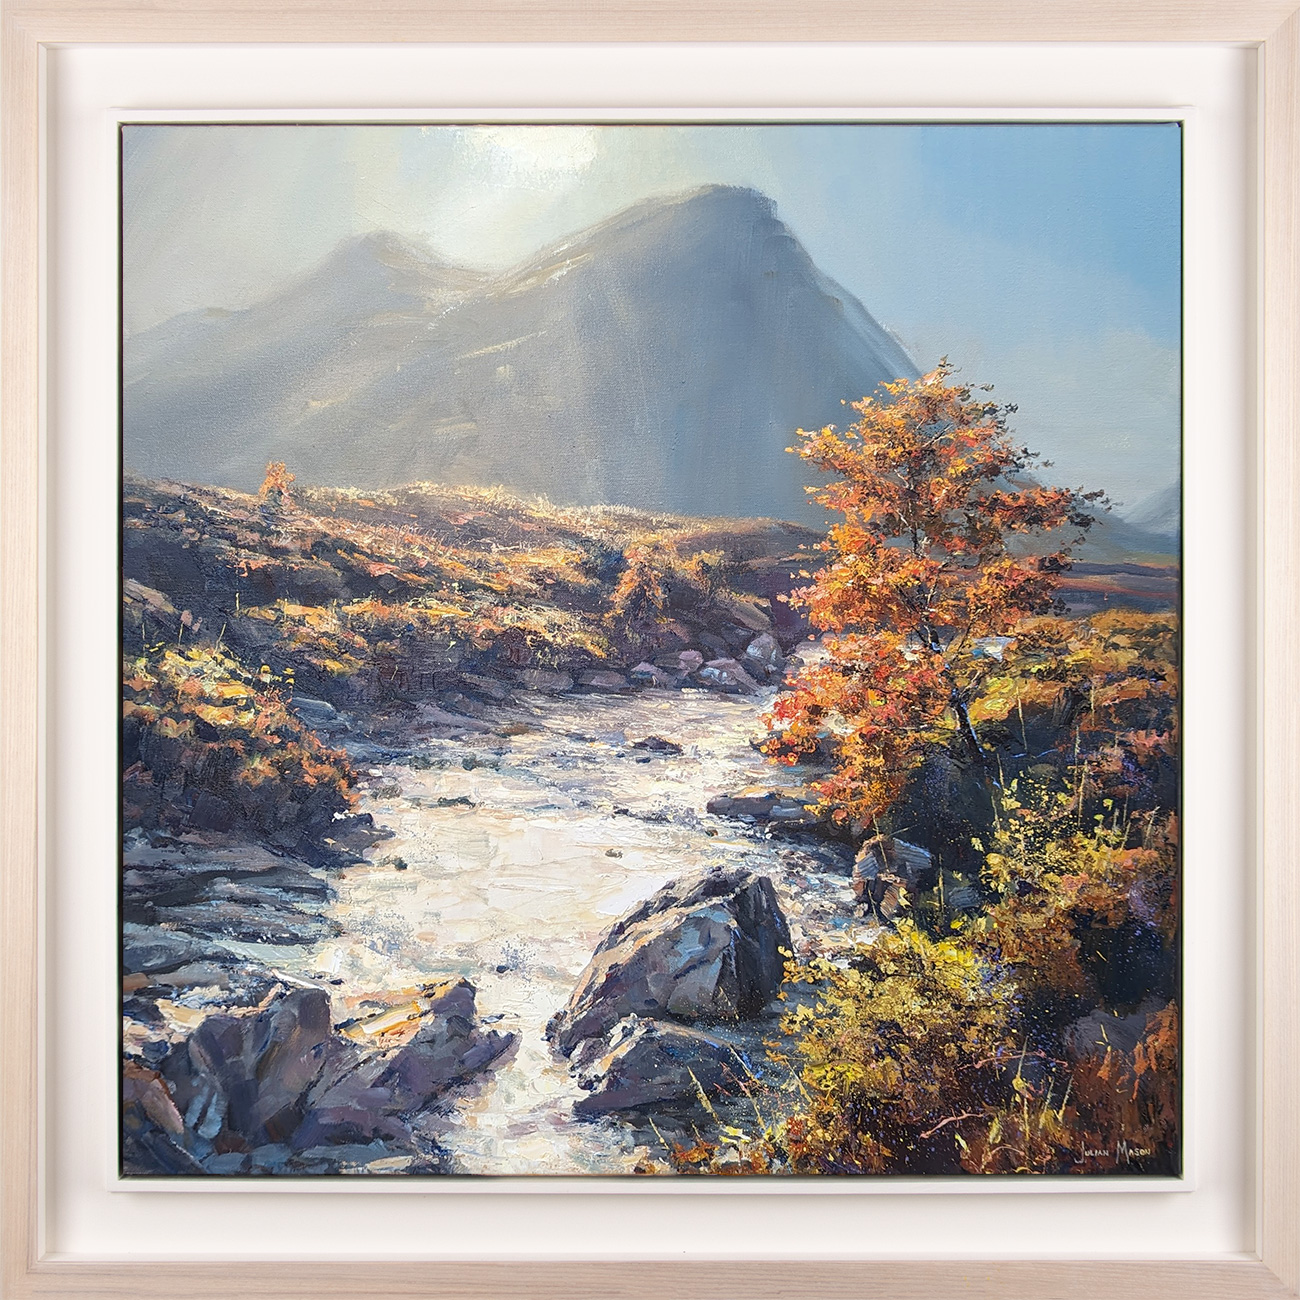 Julian Mason, Original oil painting on canvas, Stob Dearg from the West Highland Way, click to enlarge